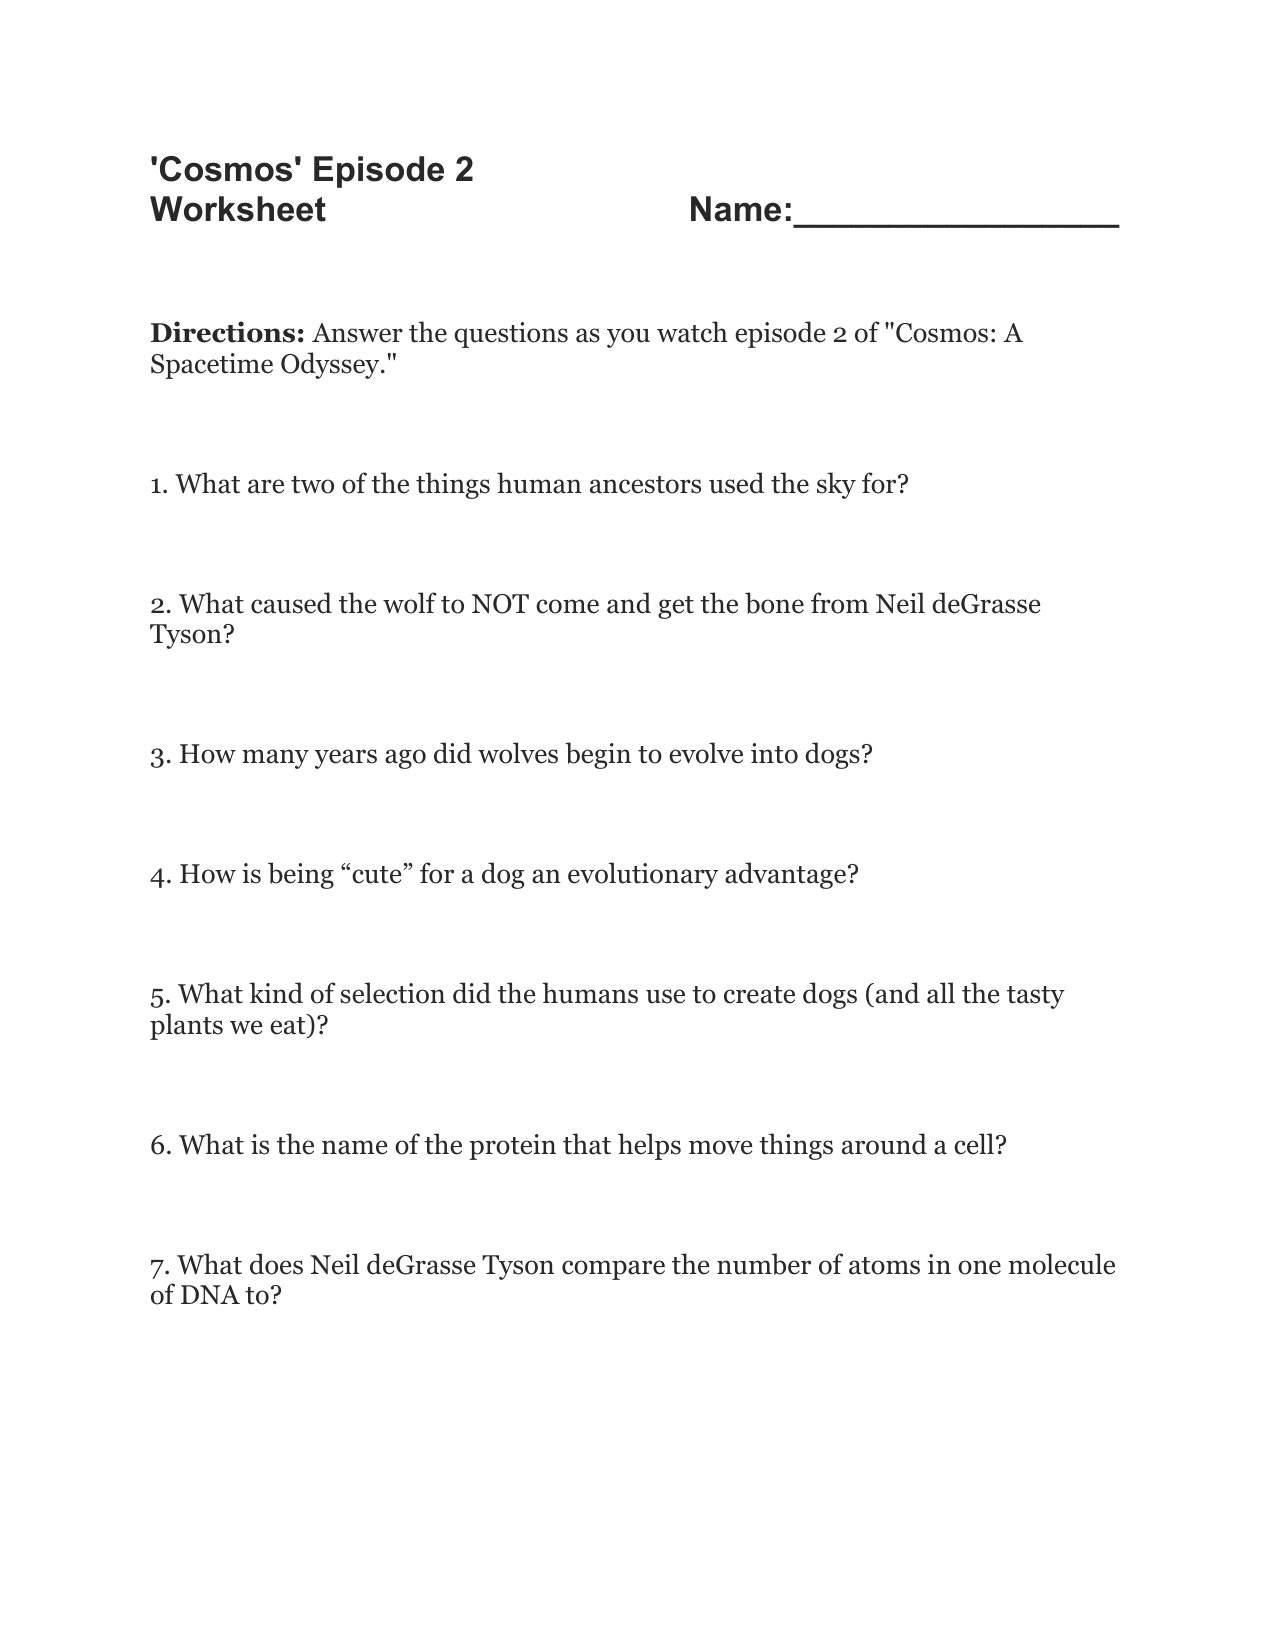 Cosmosepisode20 questions Regarding Cosmos Episode 1 Worksheet Answers